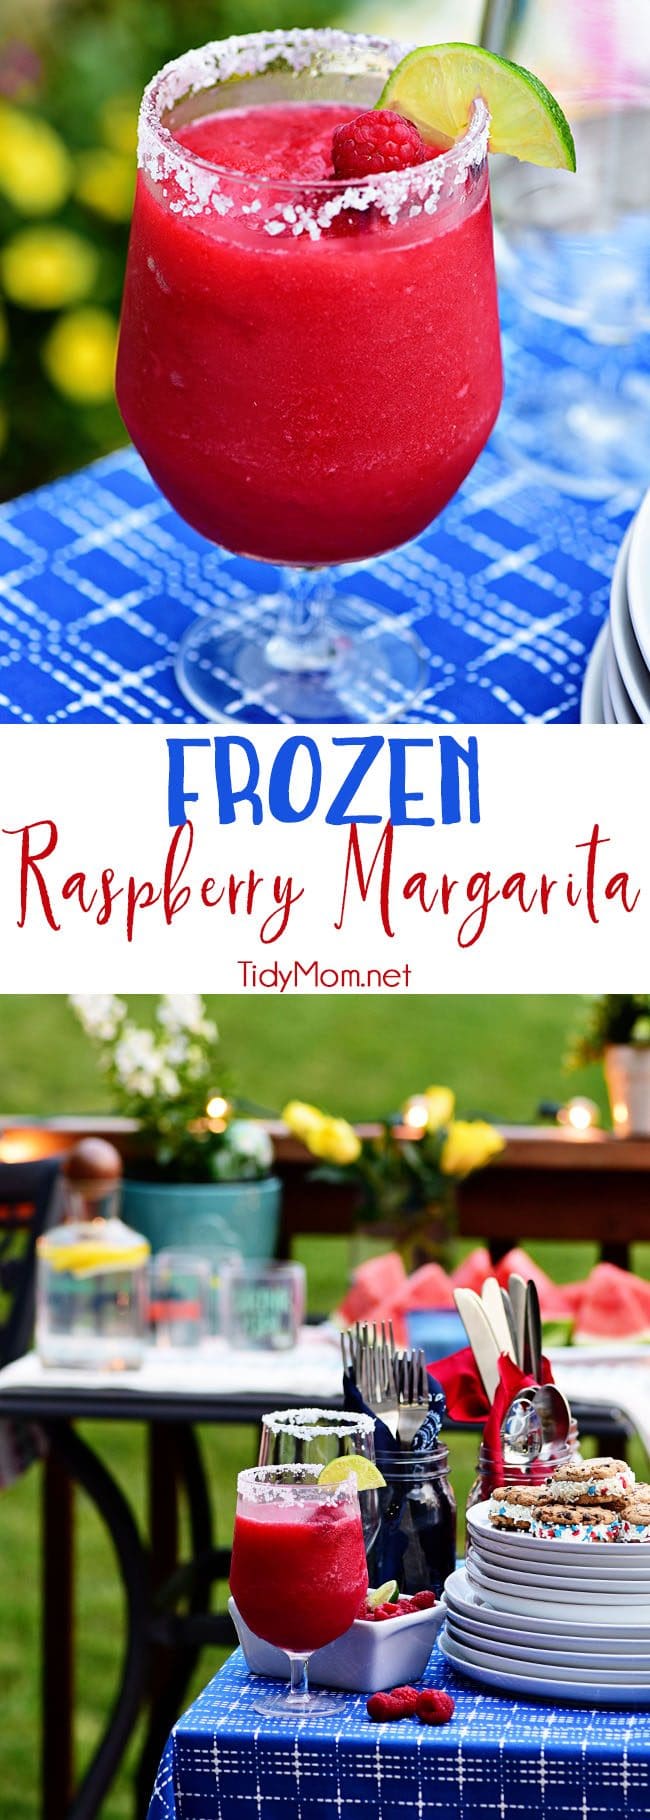 Frozen Raspberry Margarita is the perfect summer cocktail. Raspberry sorbet puts a refreshing twist on the traditional margarita, for a cool party sip! Get the full recipe at TidyMom.net - so delicious and tasty!